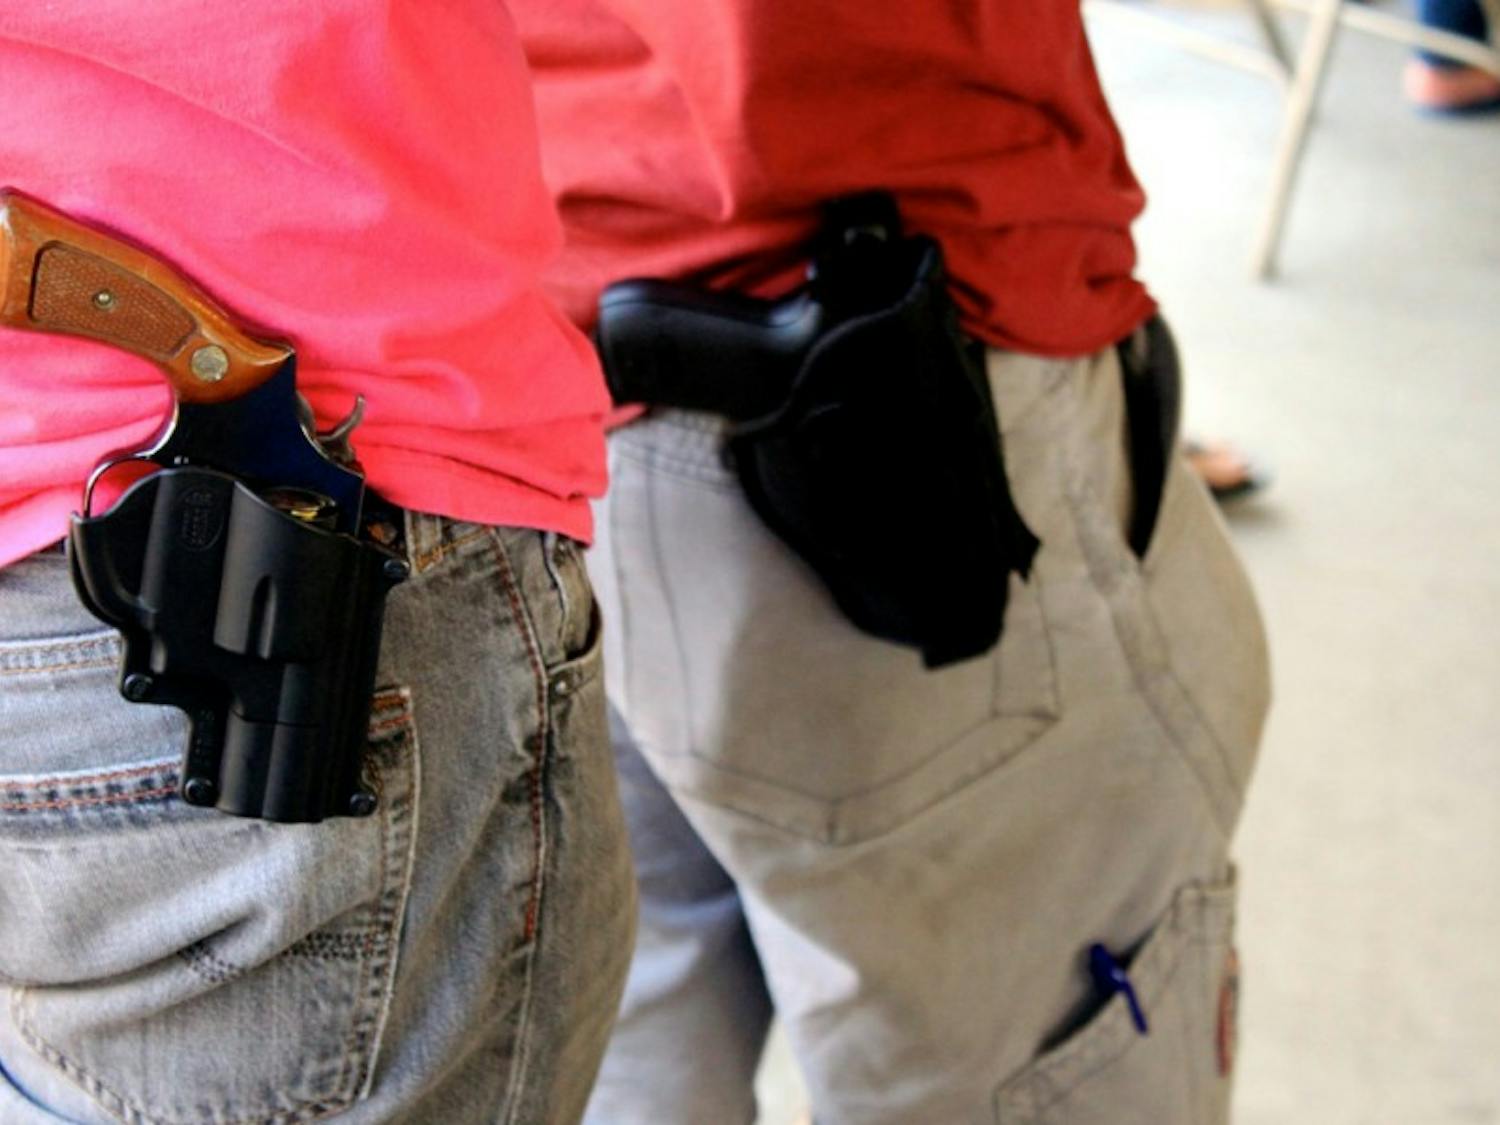 If Wisconsin politicians pass campus carry legislation in January, our campus could become more dangerous and violent.